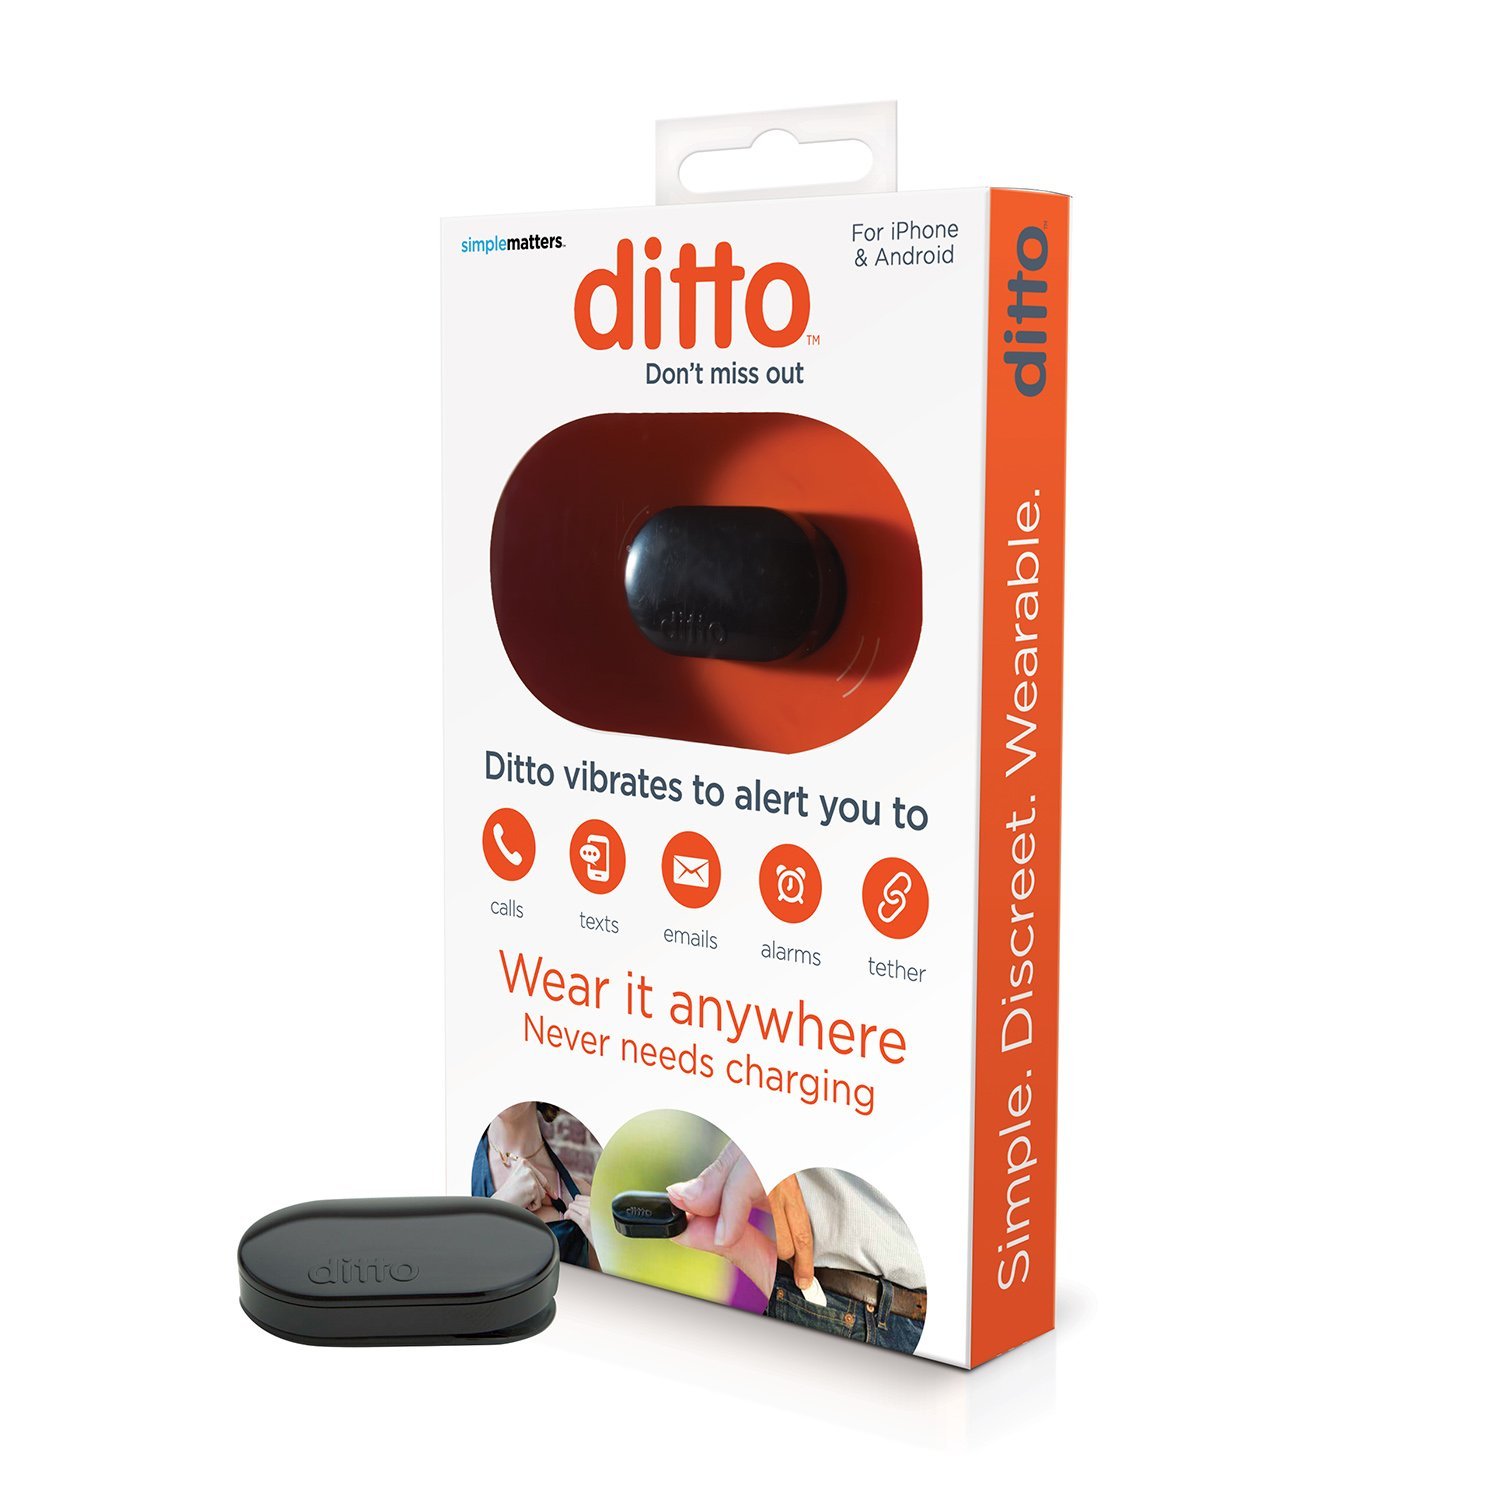 Ditto Vibrating Mobile Phone Alert System